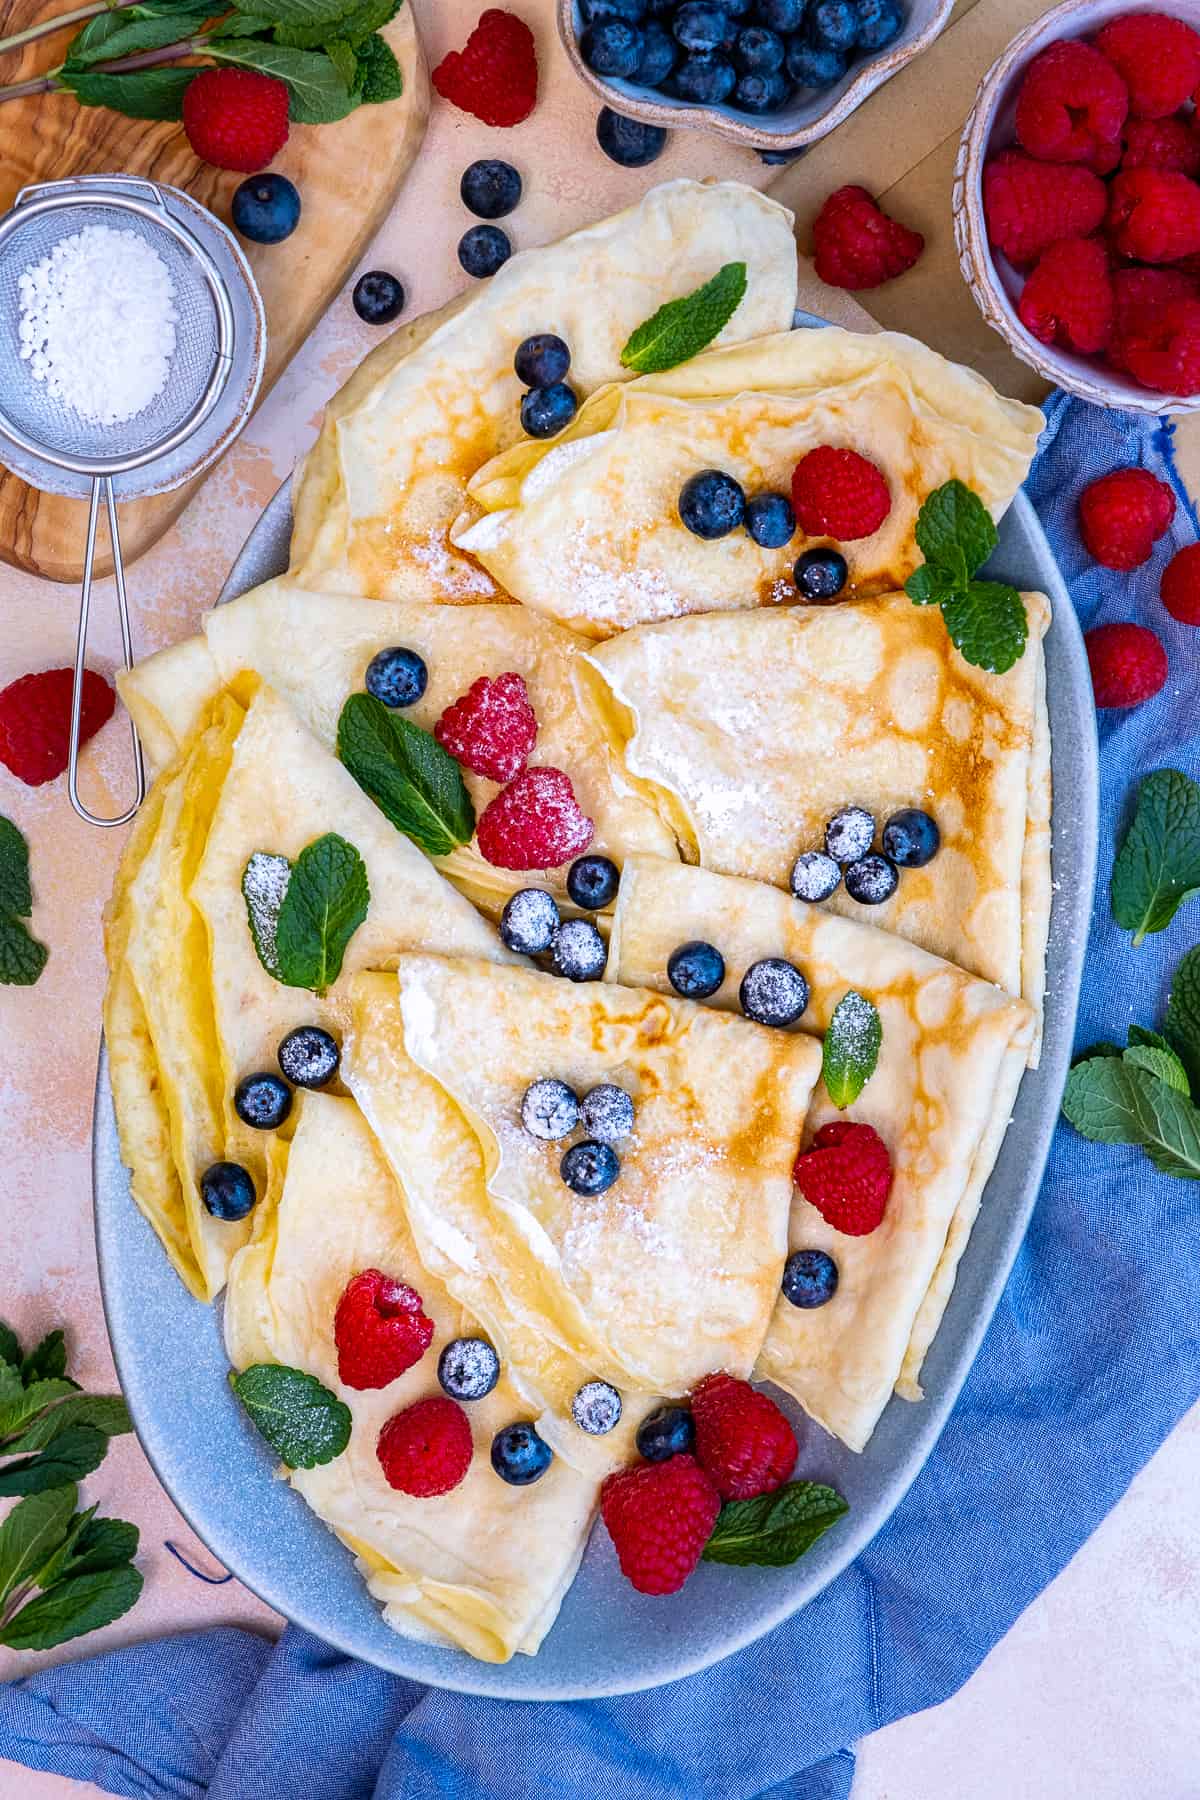 Crepes served with a little powdered sugar, fresh berries and mint leaves on an oval plate.